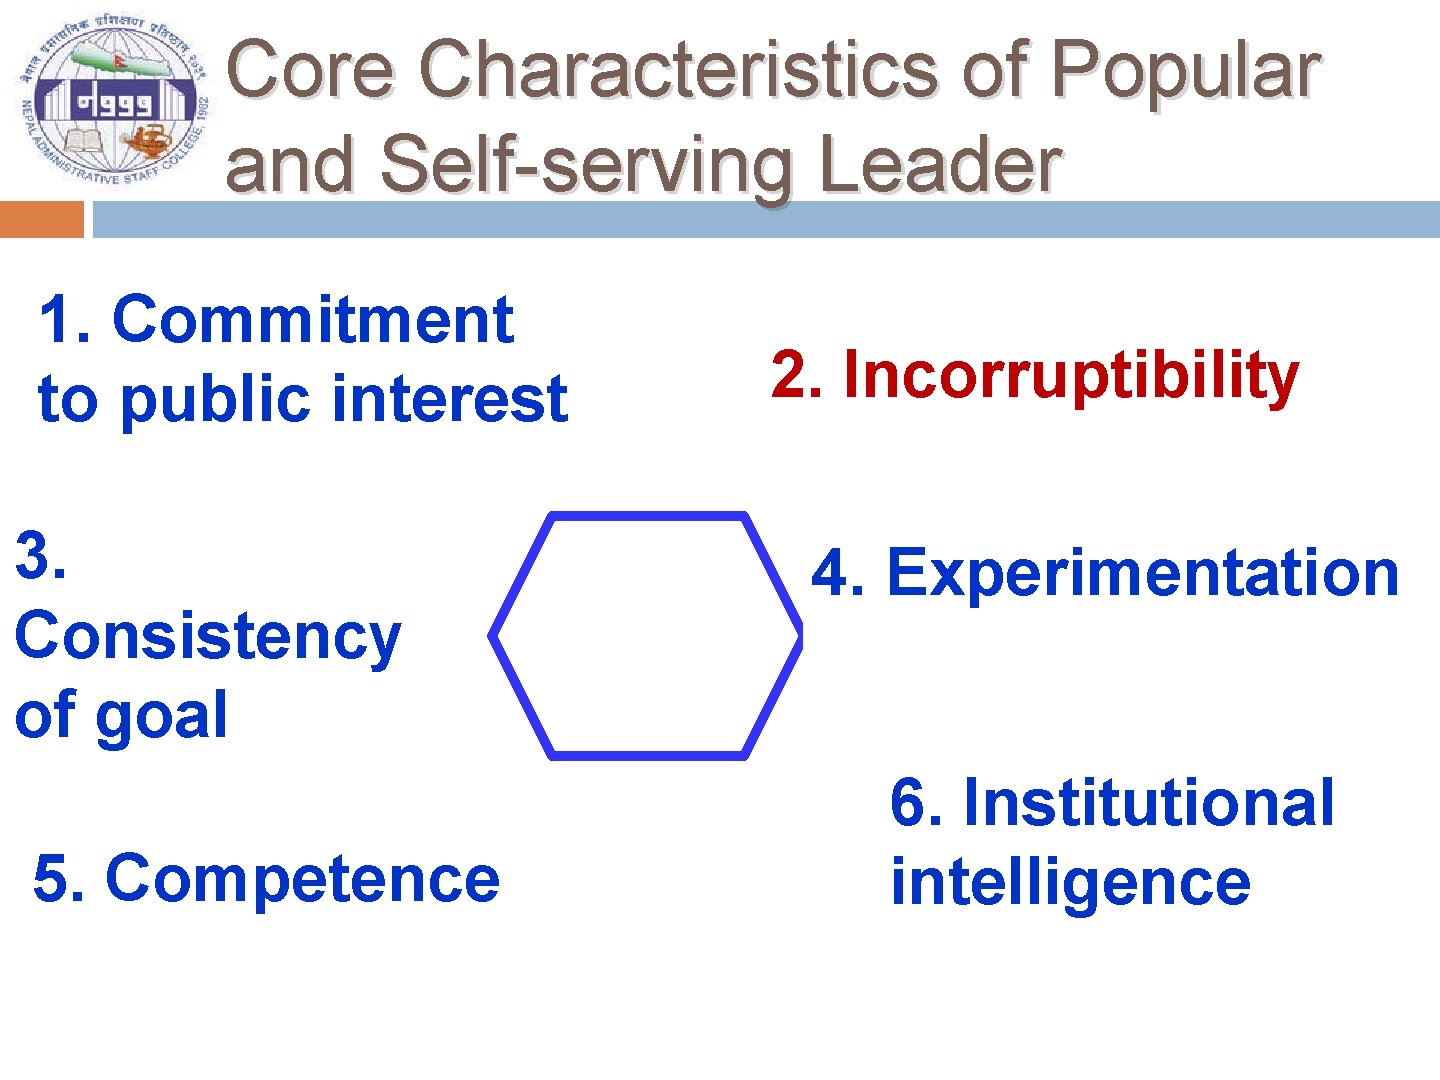 Core Characteristics of Popular and Self-serving Leader 1. Commitment to public interest 3. Consistency